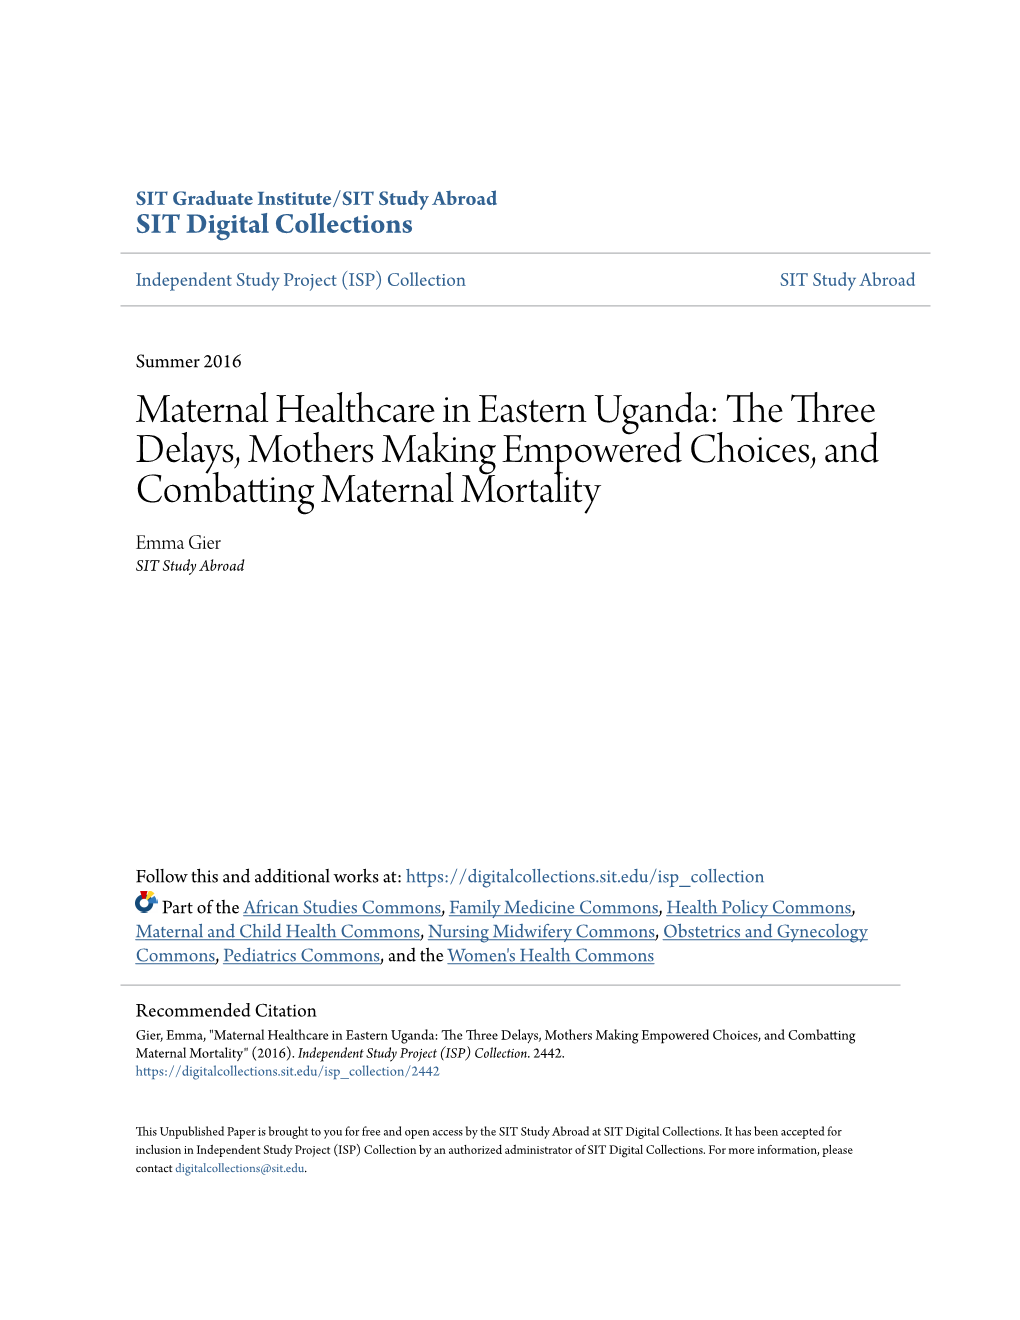 Maternal Healthcare in Eastern Uganda: the Three Delays, Mothers Making Empowered Choices, and Combatting Maternal Mortality Emma Gier SIT Study Abroad